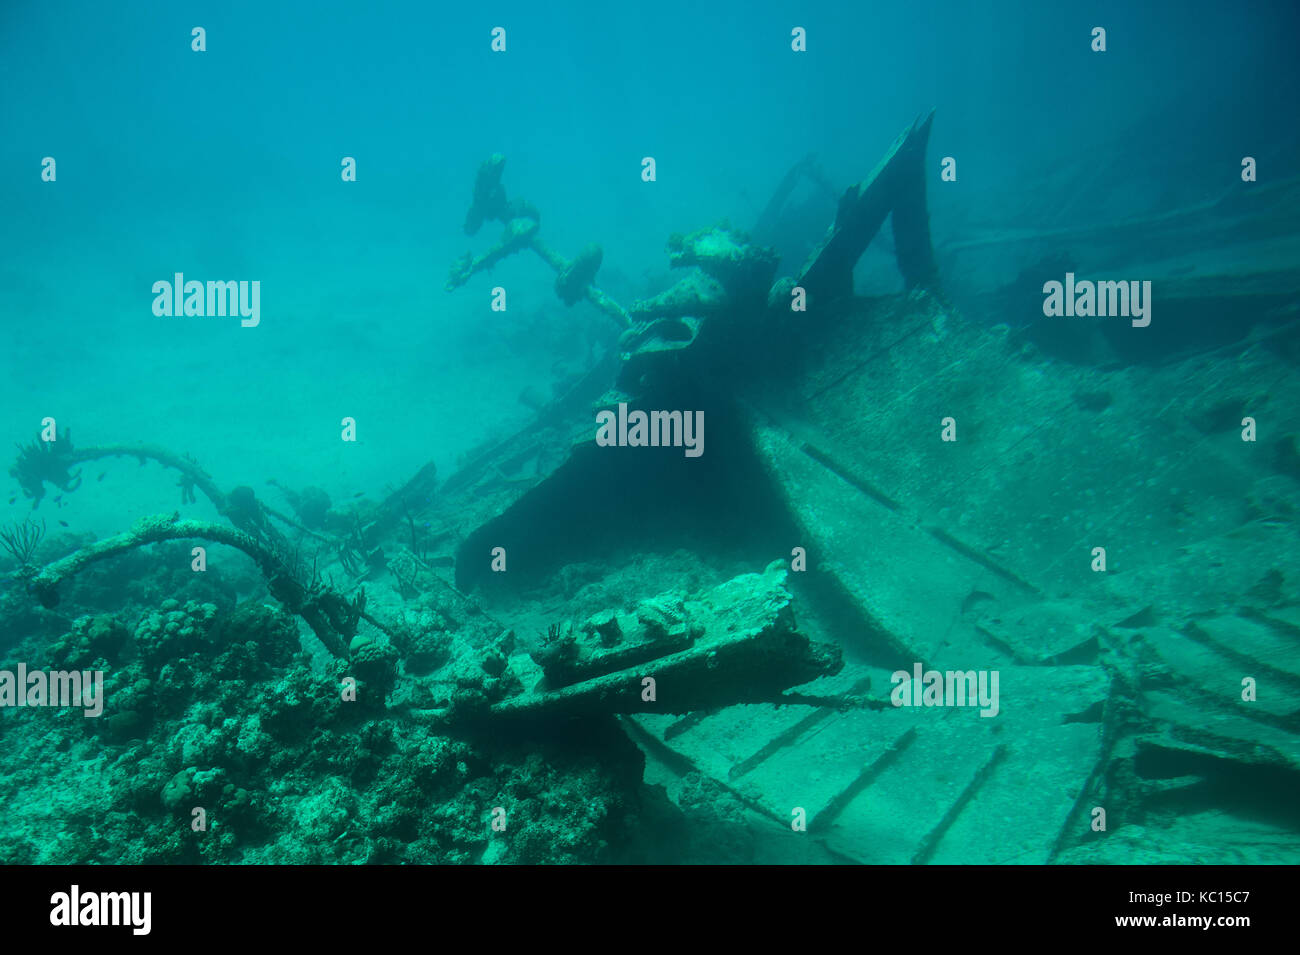 Metal bow of ship wreck on bottom of blue sea water Stock Photo